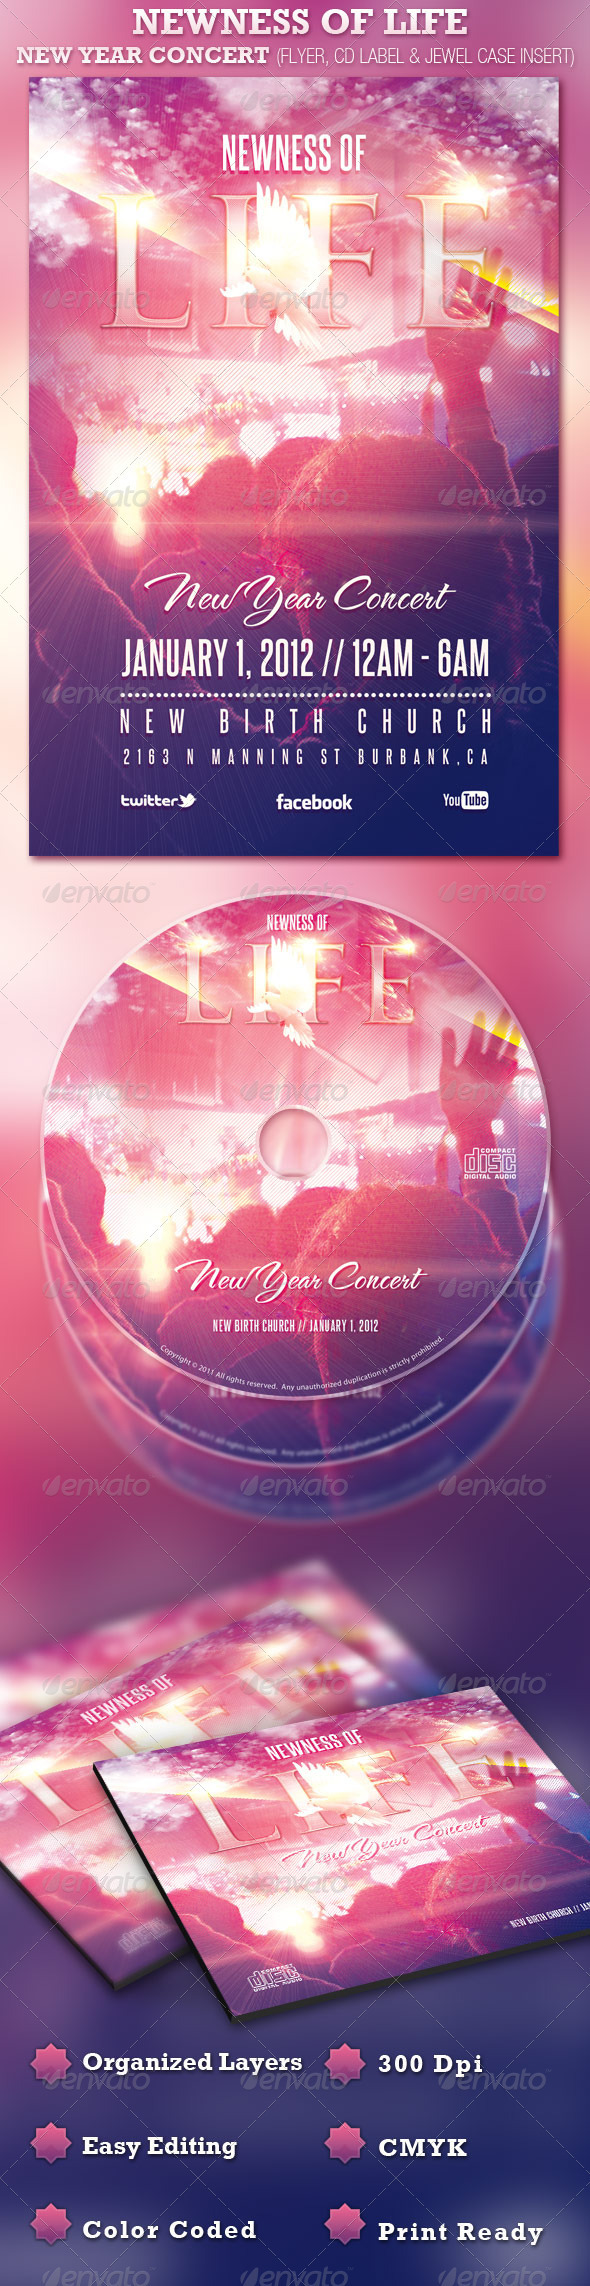 Newness of Life Concert Flyer and CD